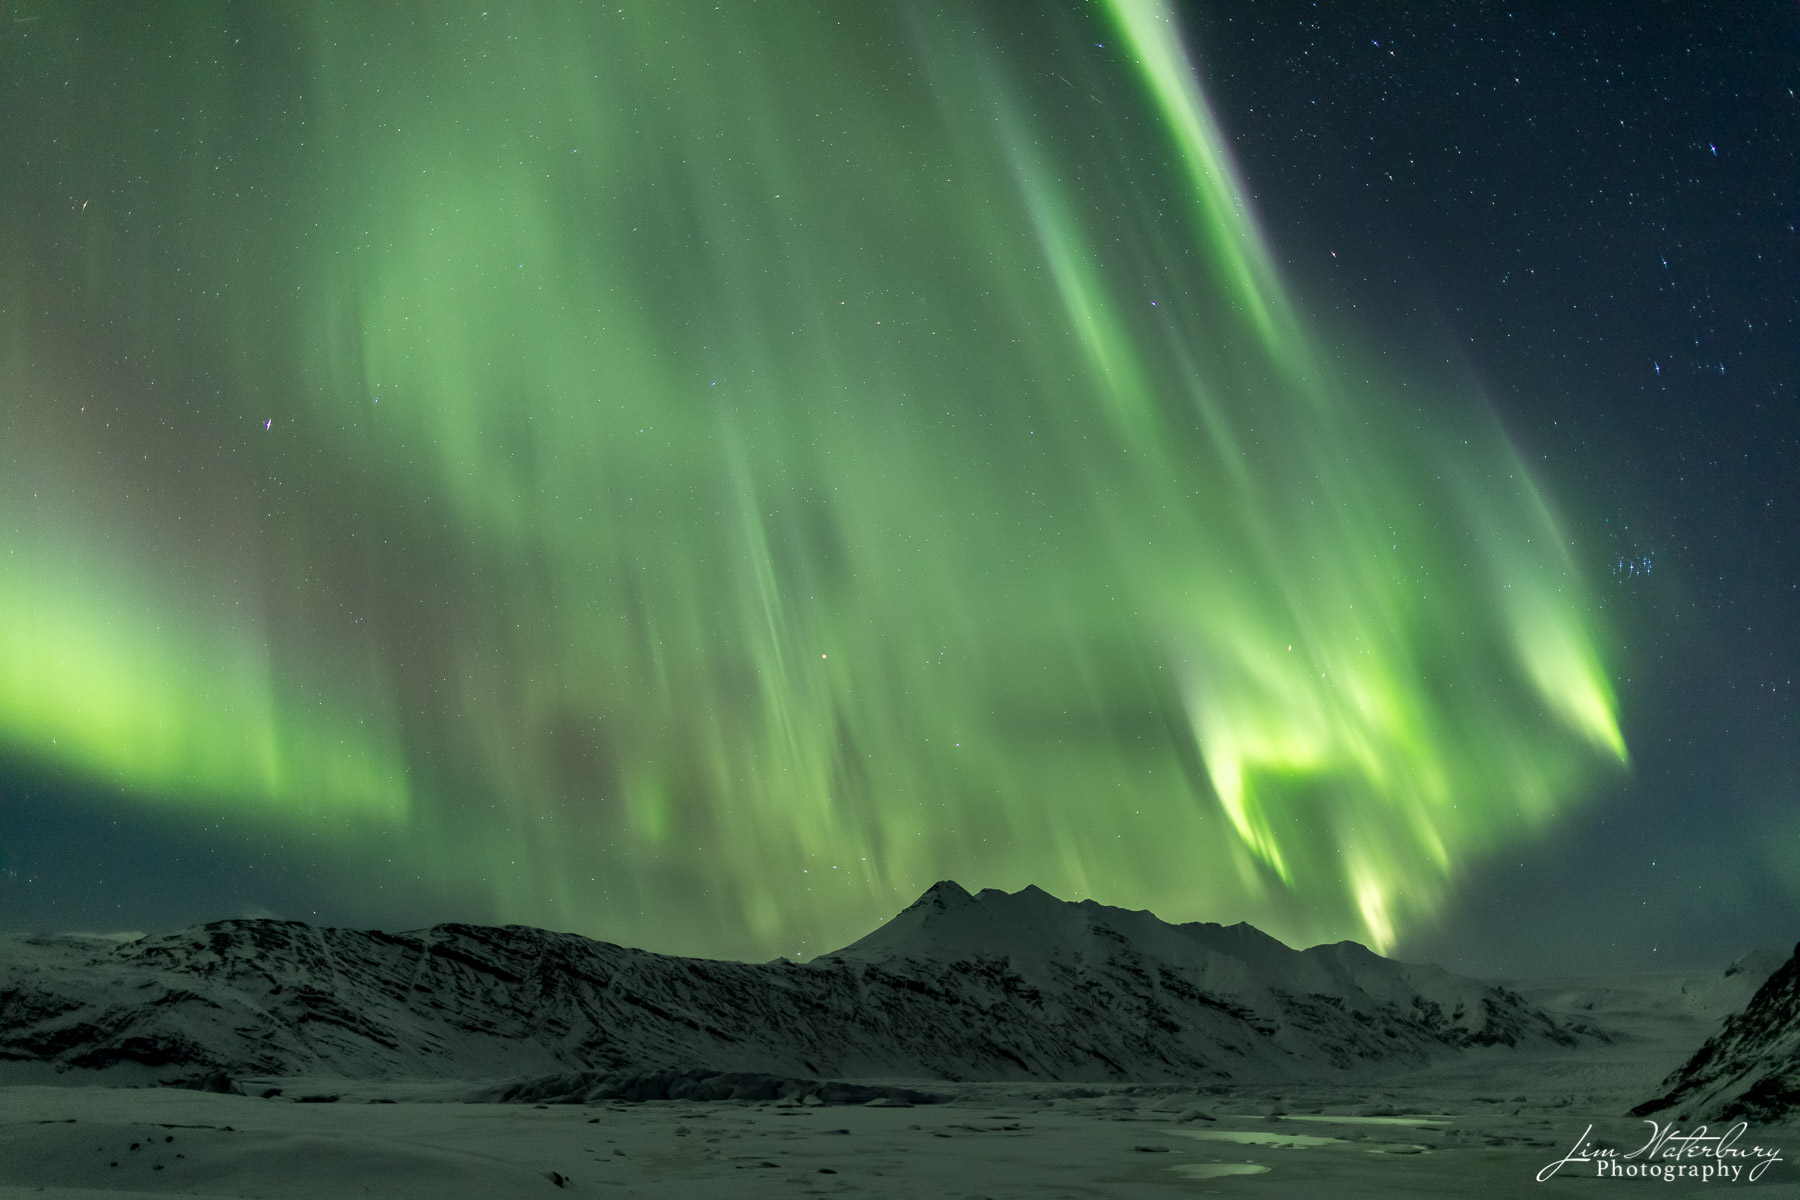 Northern lights (Aurora Borealis) dance in a star-studded sky above the mountains and frozen tundra of Iceland.